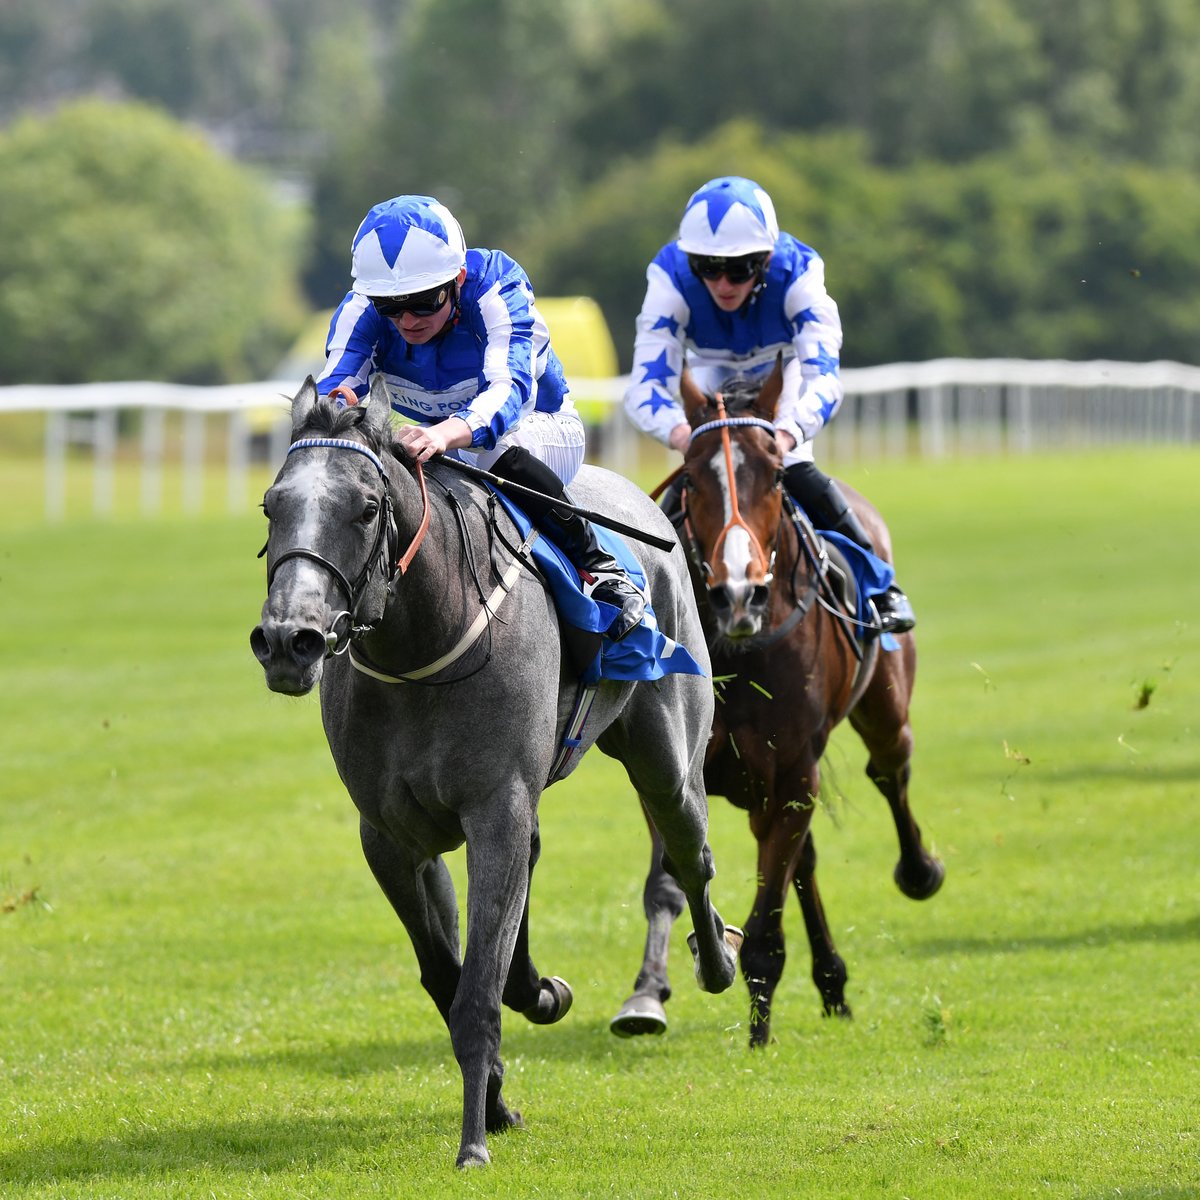 Ahead of today's raceday in Oadby, get a lowdown on the runners and riders for King Power Racing 🐎 You can still join us by using the discount code KING24 via the link below! 👉 bit.ly/3yxlD4J